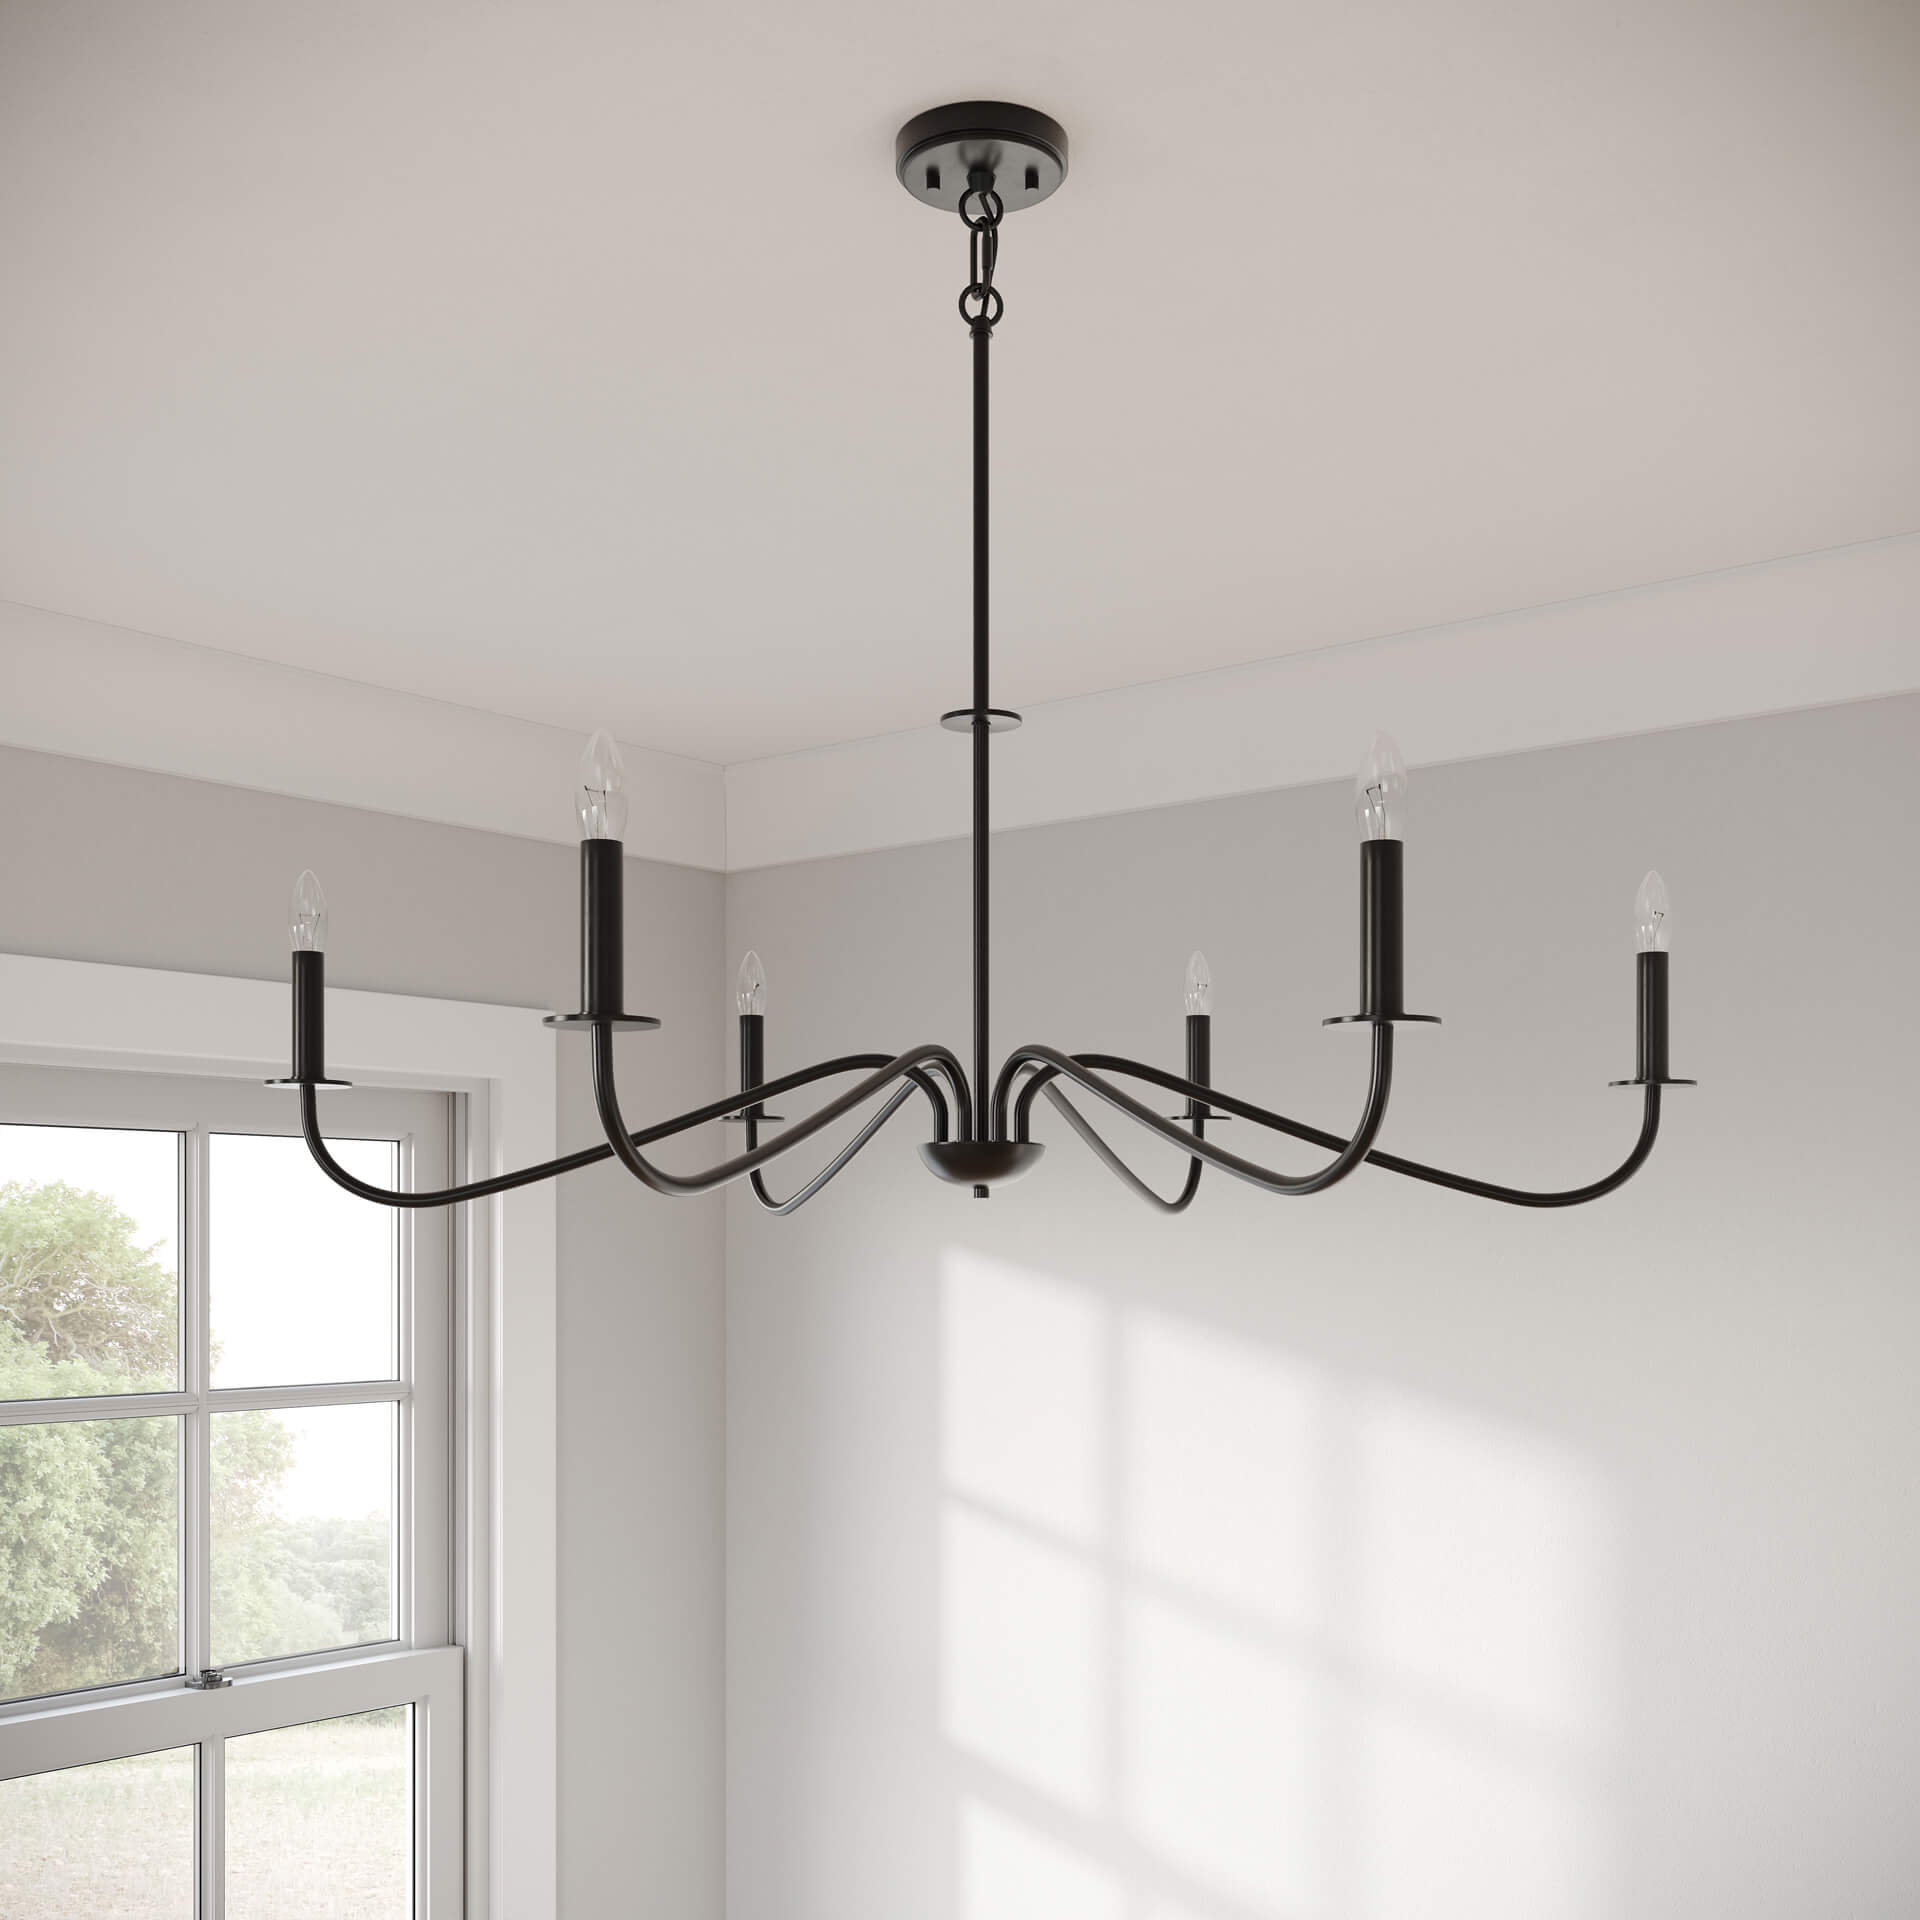 Product Detail Image of Black Chandelier